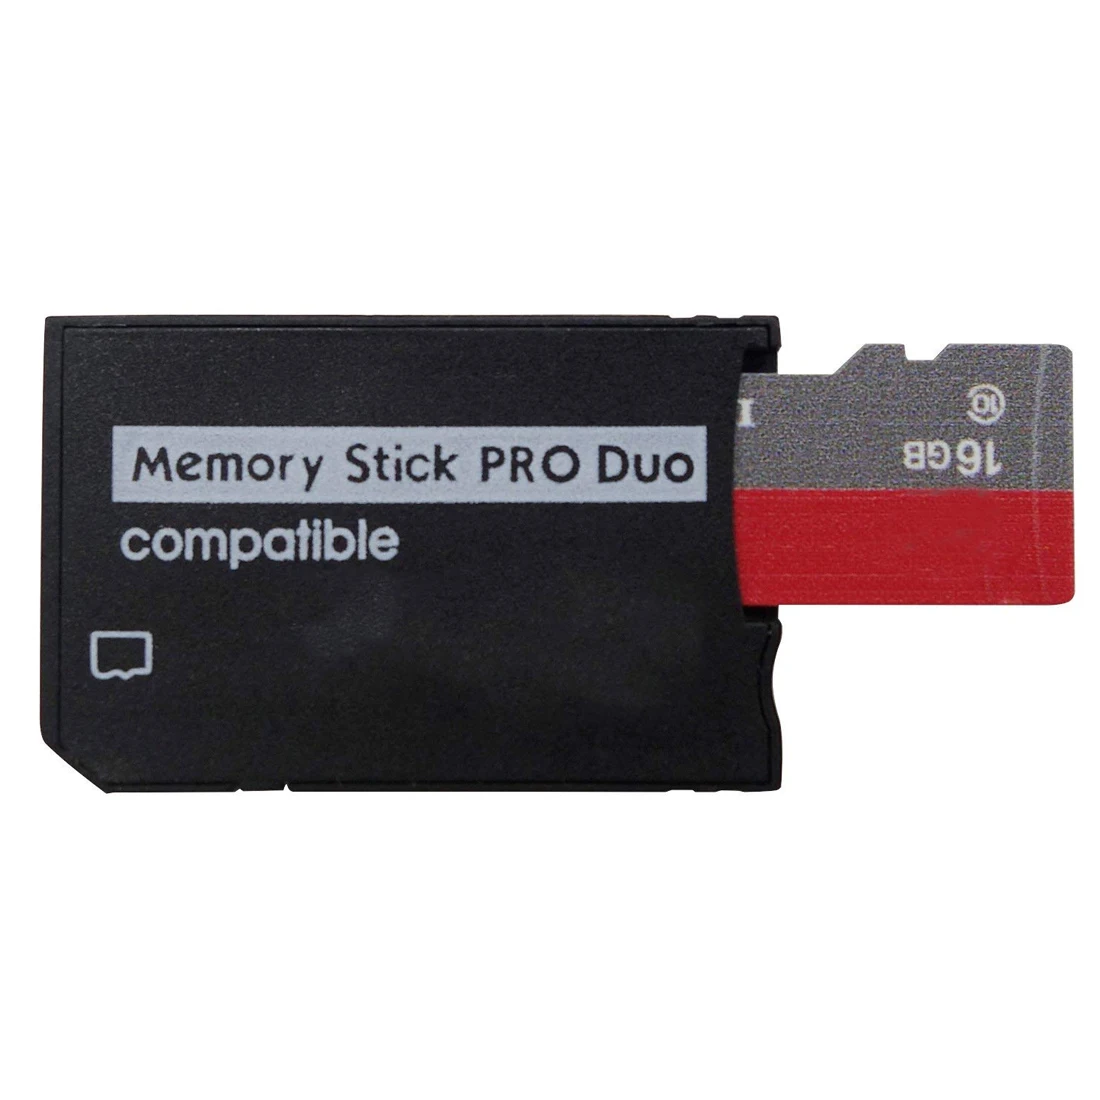 

Memory Card Adapter for Micro SD To MS Pro Duo Adaptor Conventer Memory Stick Pro Duo Adaptor for Sony & PSP Series 1MB-128GB